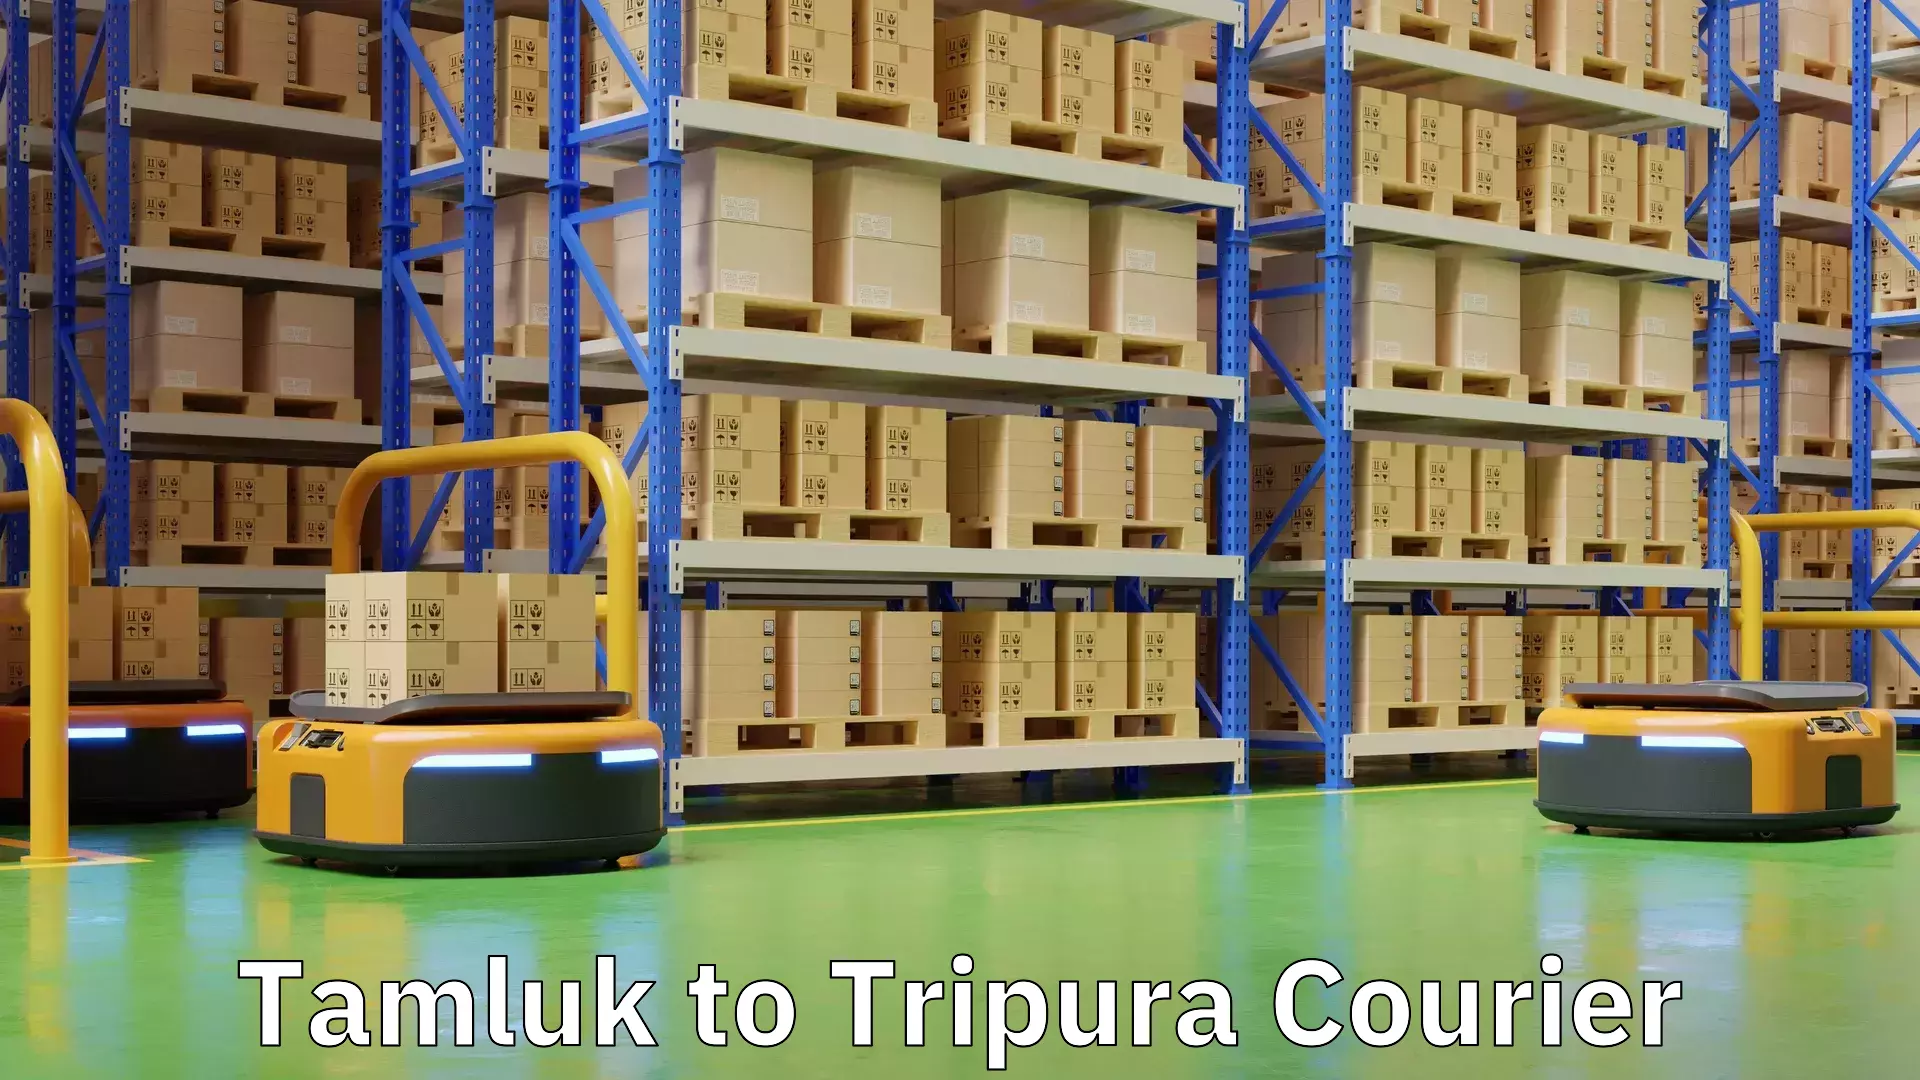 Flexible delivery scheduling Tamluk to Tripura